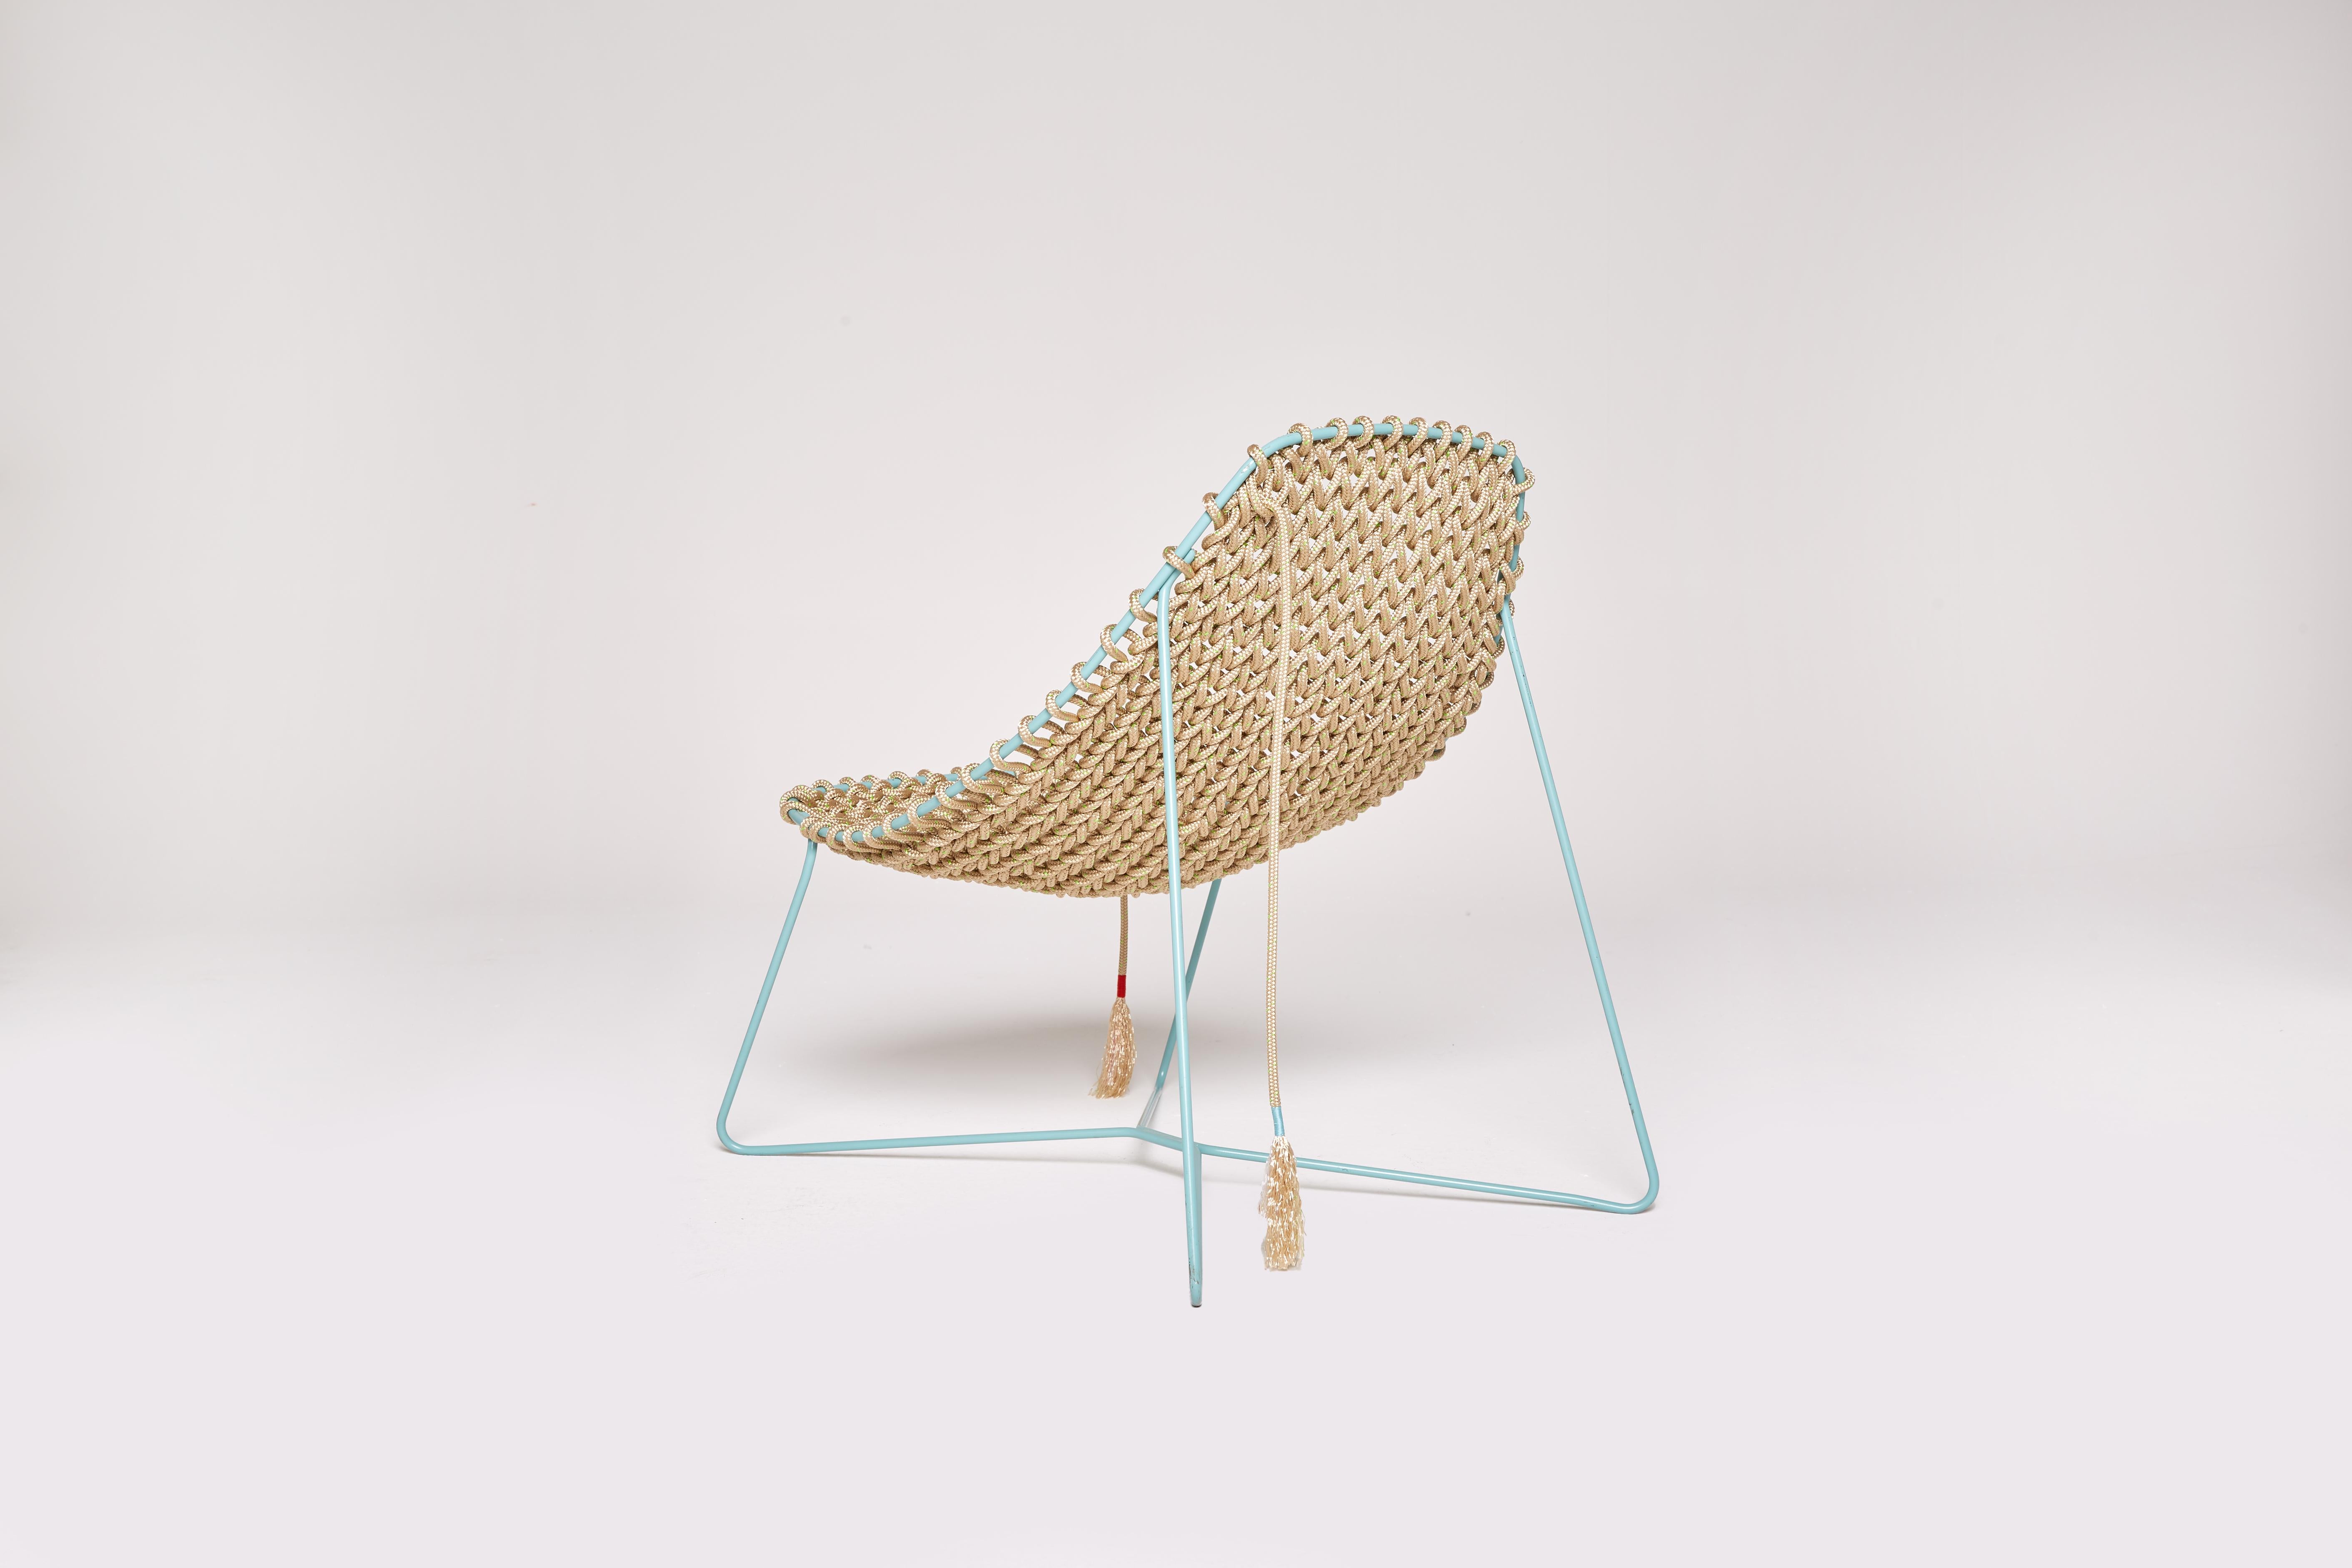 Minimalist Award nominated beige hand knitted lounger with blue frame by hettler.tüllmann For Sale